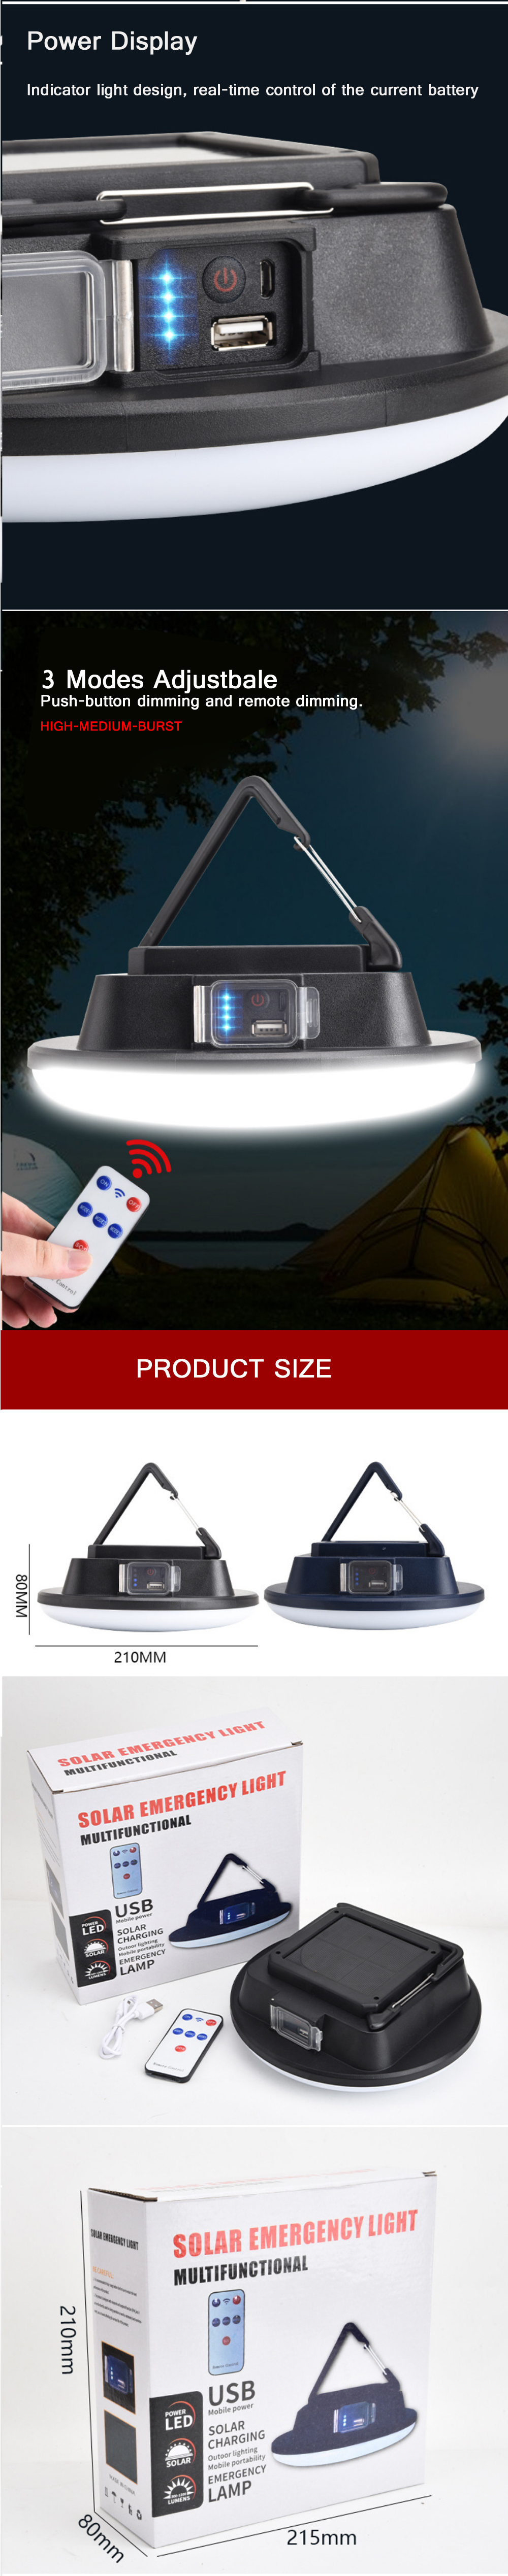 XANESreg-Solar-LED-Camping-Lamp-With-Remote-Control-IPX6-Waterproof-Outdoor-Floodlight-3-Modes-Hangi-1769909-3